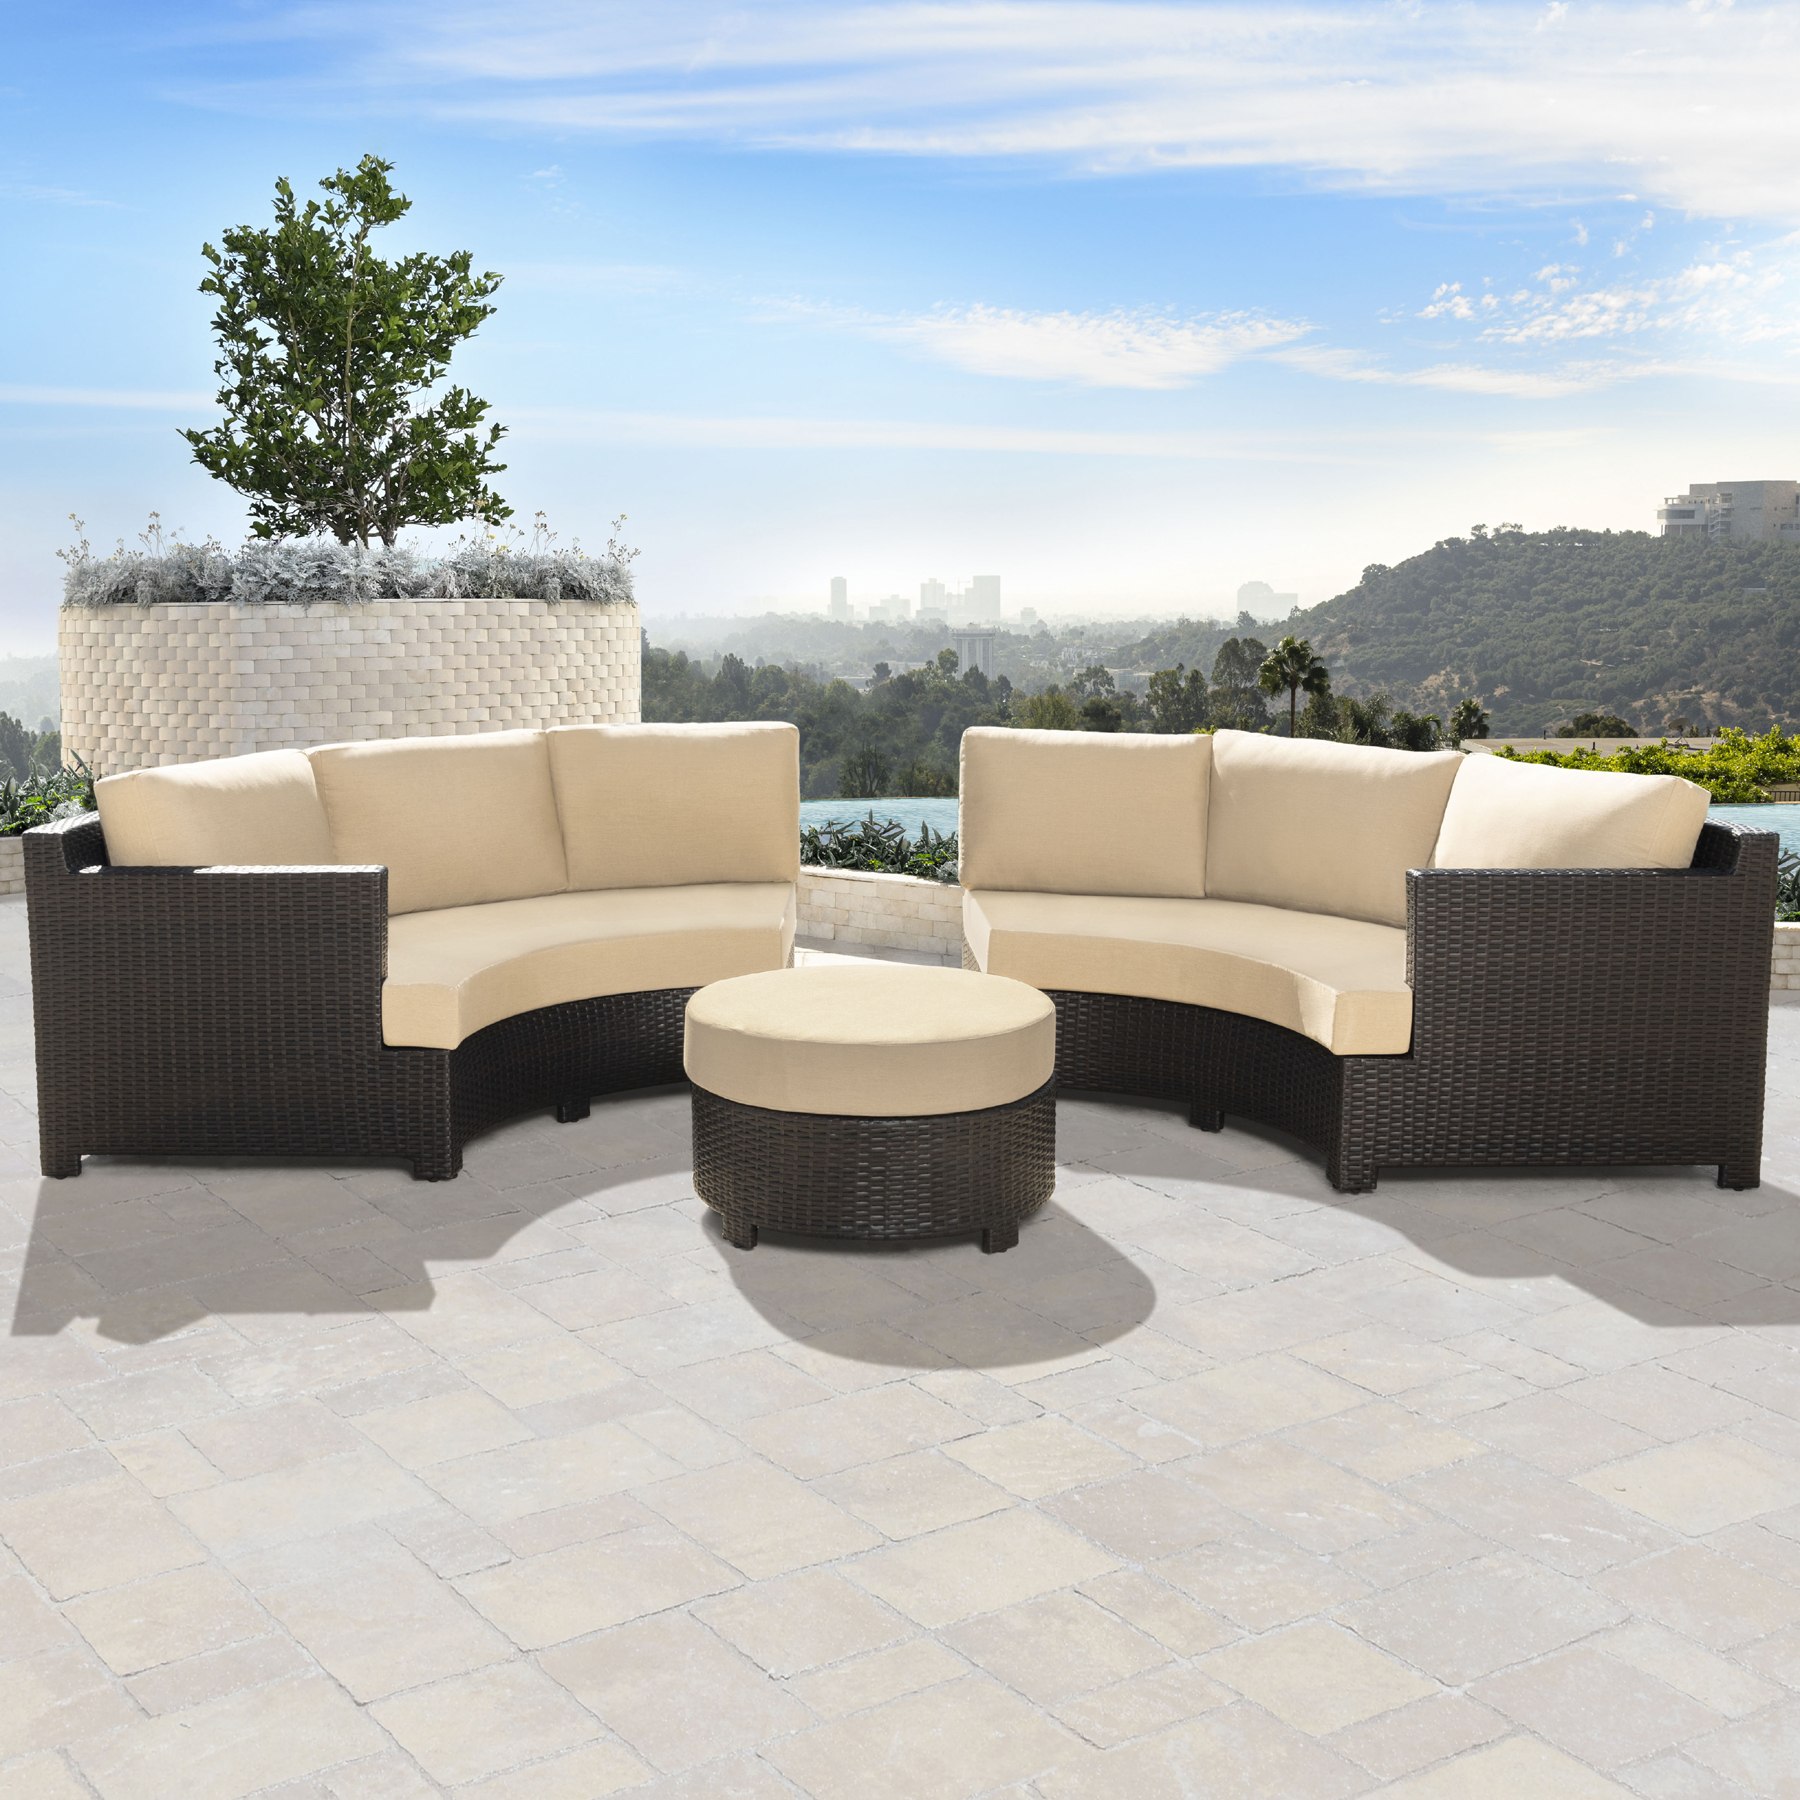 Belmont 3 Piece Curved Sectional Costco - Capilano Curved All Weather Wicker Patio Sectional Sofa Set